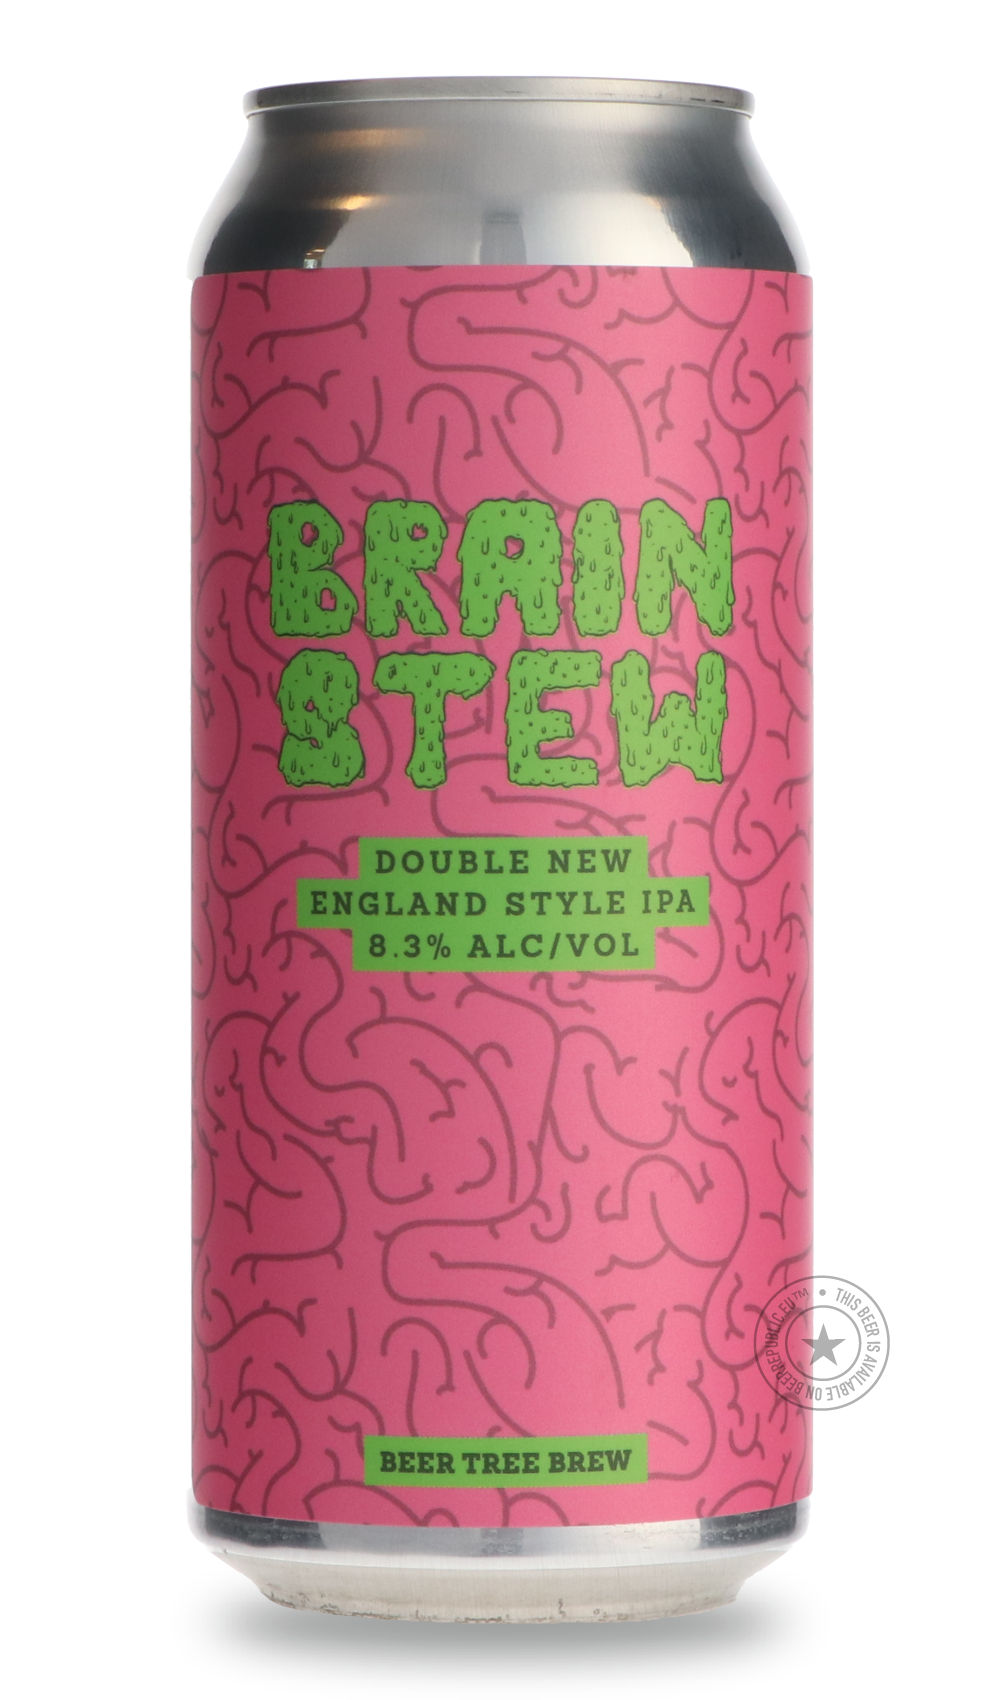 -Beer Tree- Brain Stew-IPA- Only @ Beer Republic - The best online beer store for American & Canadian craft beer - Buy beer online from the USA and Canada - Bier online kopen - Amerikaans bier kopen - Craft beer store - Craft beer kopen - Amerikanisch bier kaufen - Bier online kaufen - Acheter biere online - IPA - Stout - Porter - New England IPA - Hazy IPA - Imperial Stout - Barrel Aged - Barrel Aged Imperial Stout - Brown - Dark beer - Blond - Blonde - Pilsner - Lager - Wheat - Weizen - Amber - Barley Win